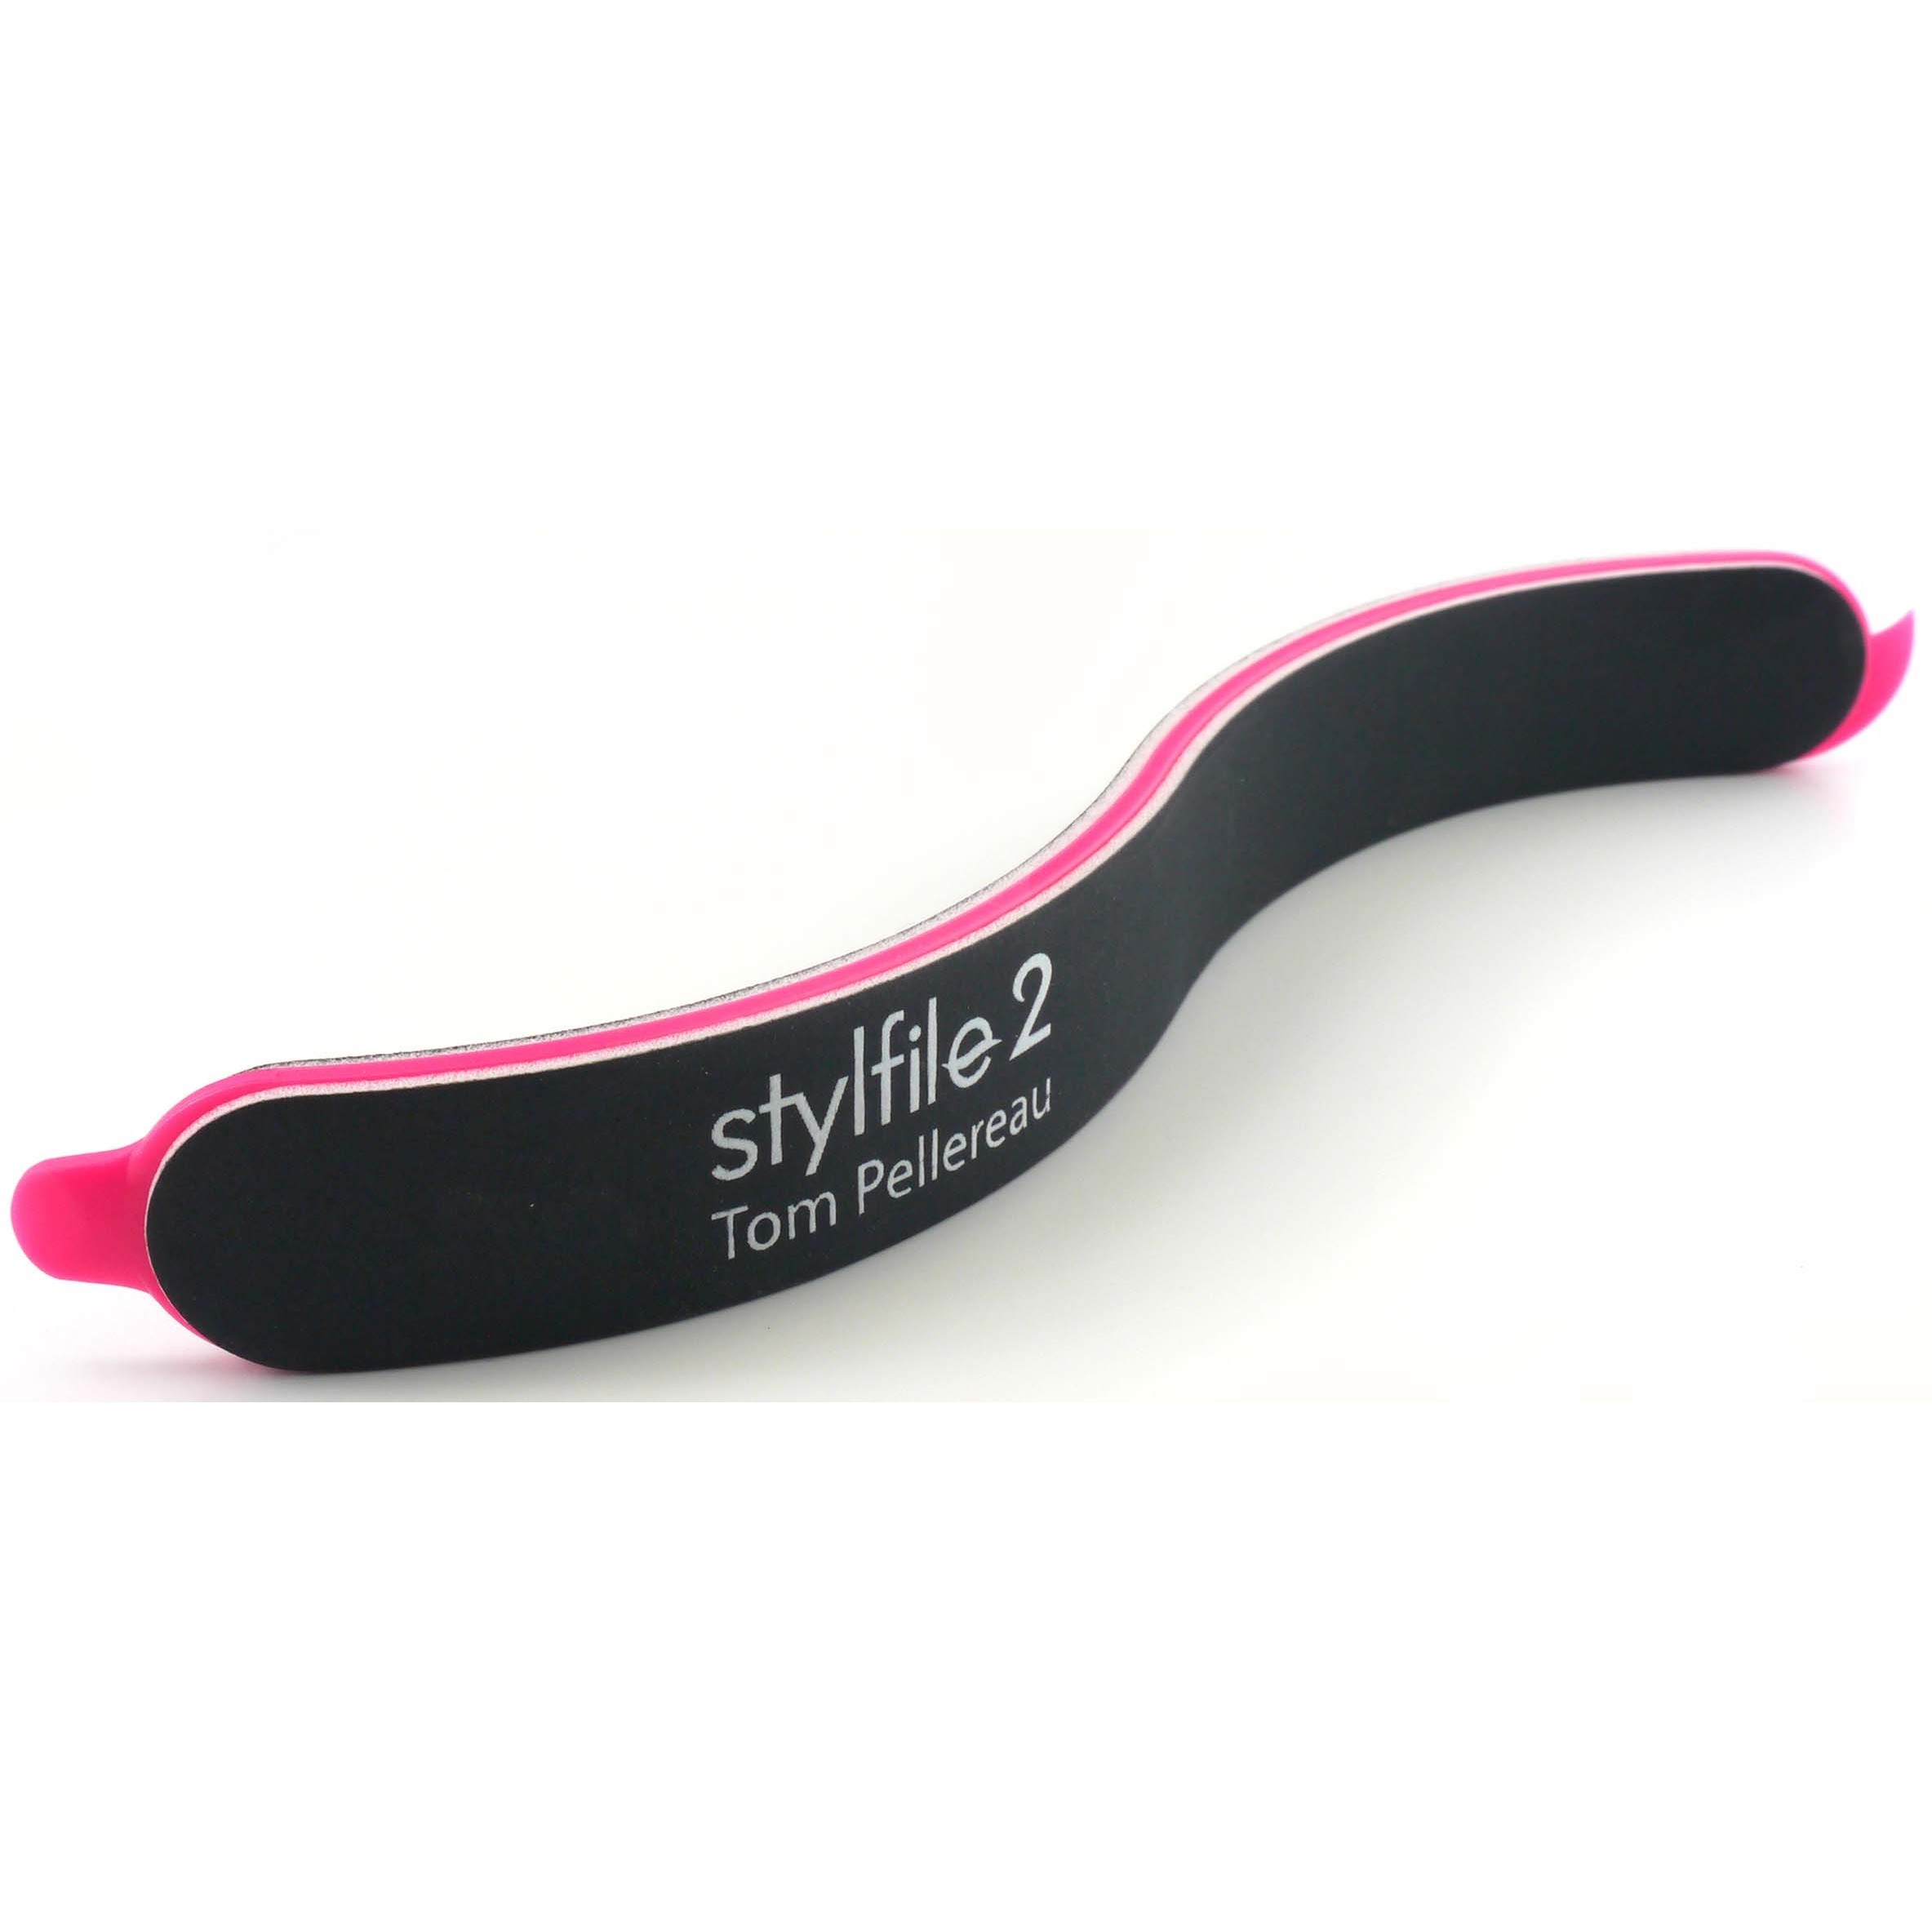 STYLPRO STYLFILE S-File